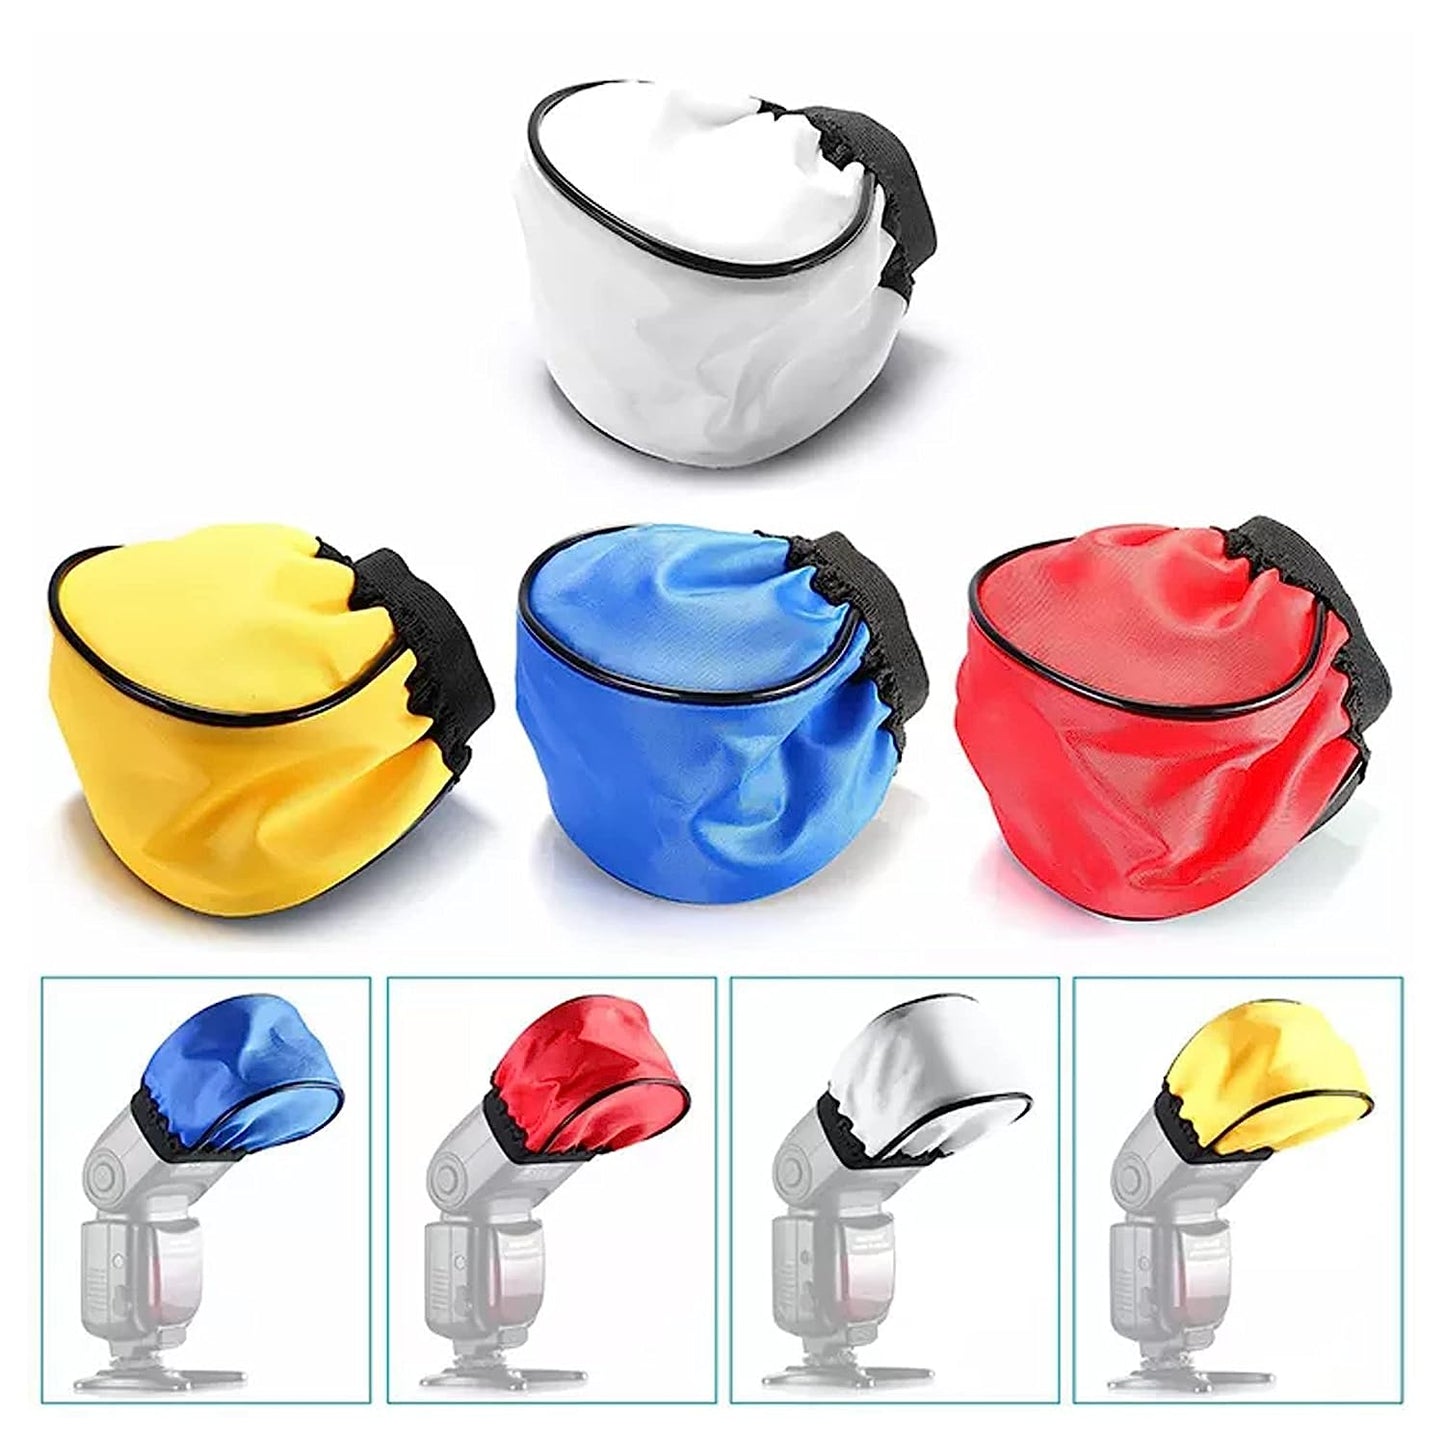 EYUVAA Flash Diffuser with Four Color Domes White,Blue Orange and Yellow Cloth Diffuser for Camera Flash Photography